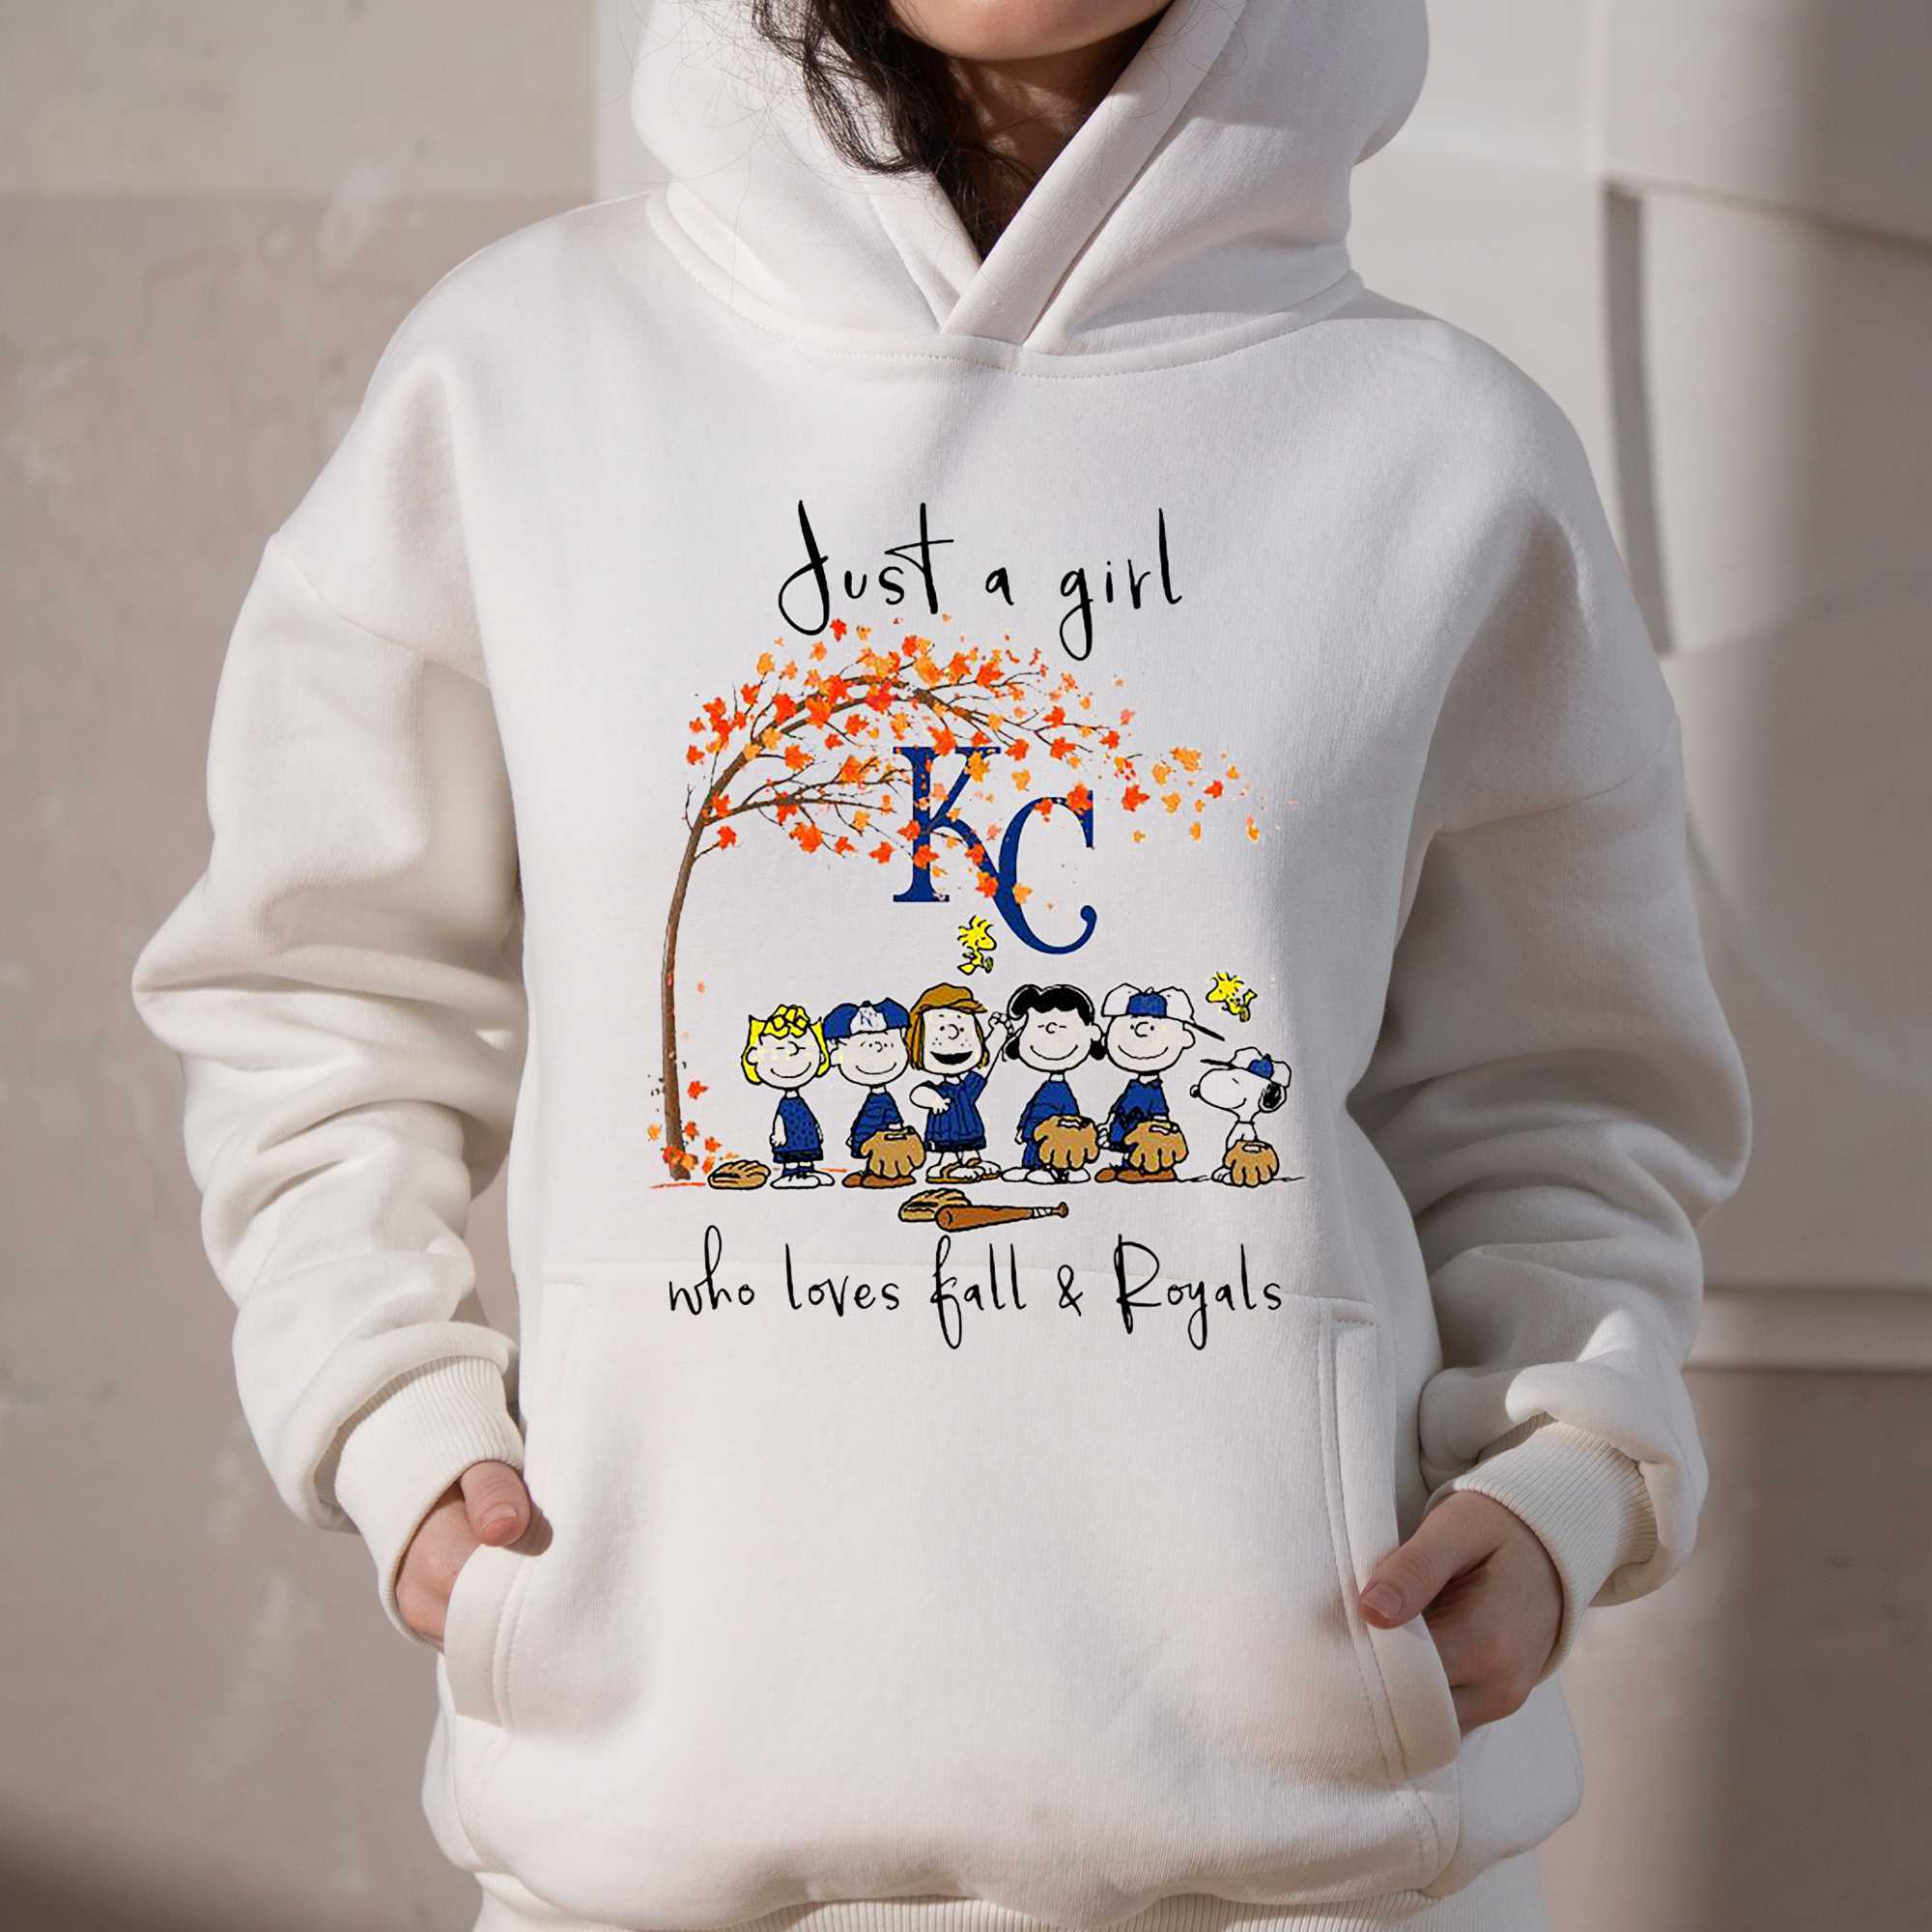 Kansas City Royals Sweater Amazing Snoopy Gifts For Royals Fans